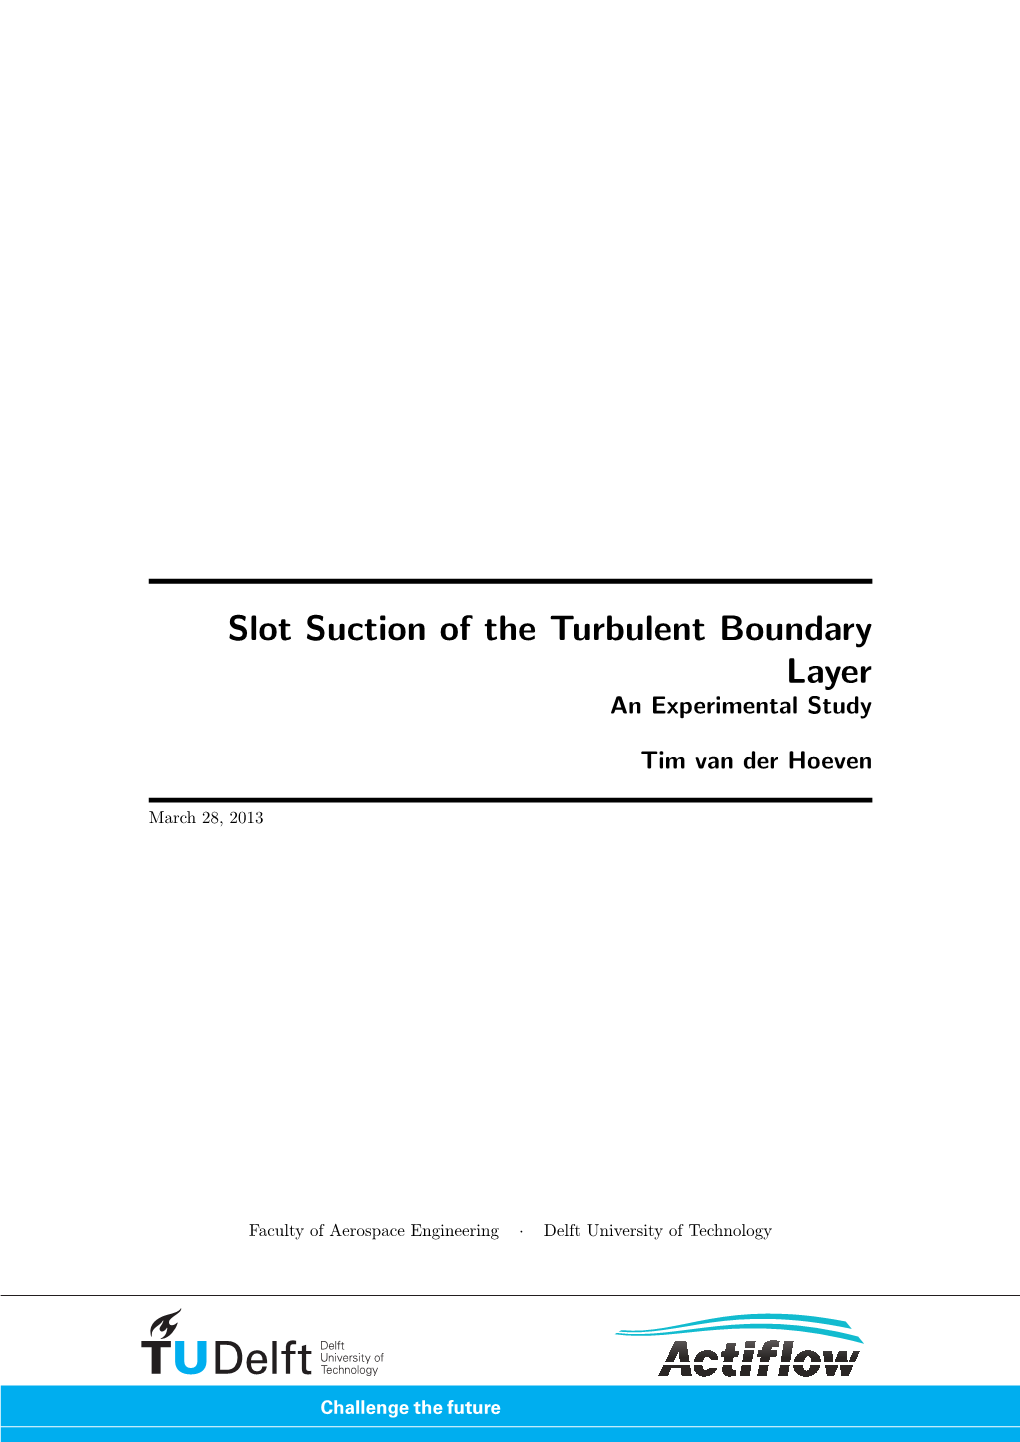 Slot Suction of the Turbulent Boundary Layer an Experimental Study